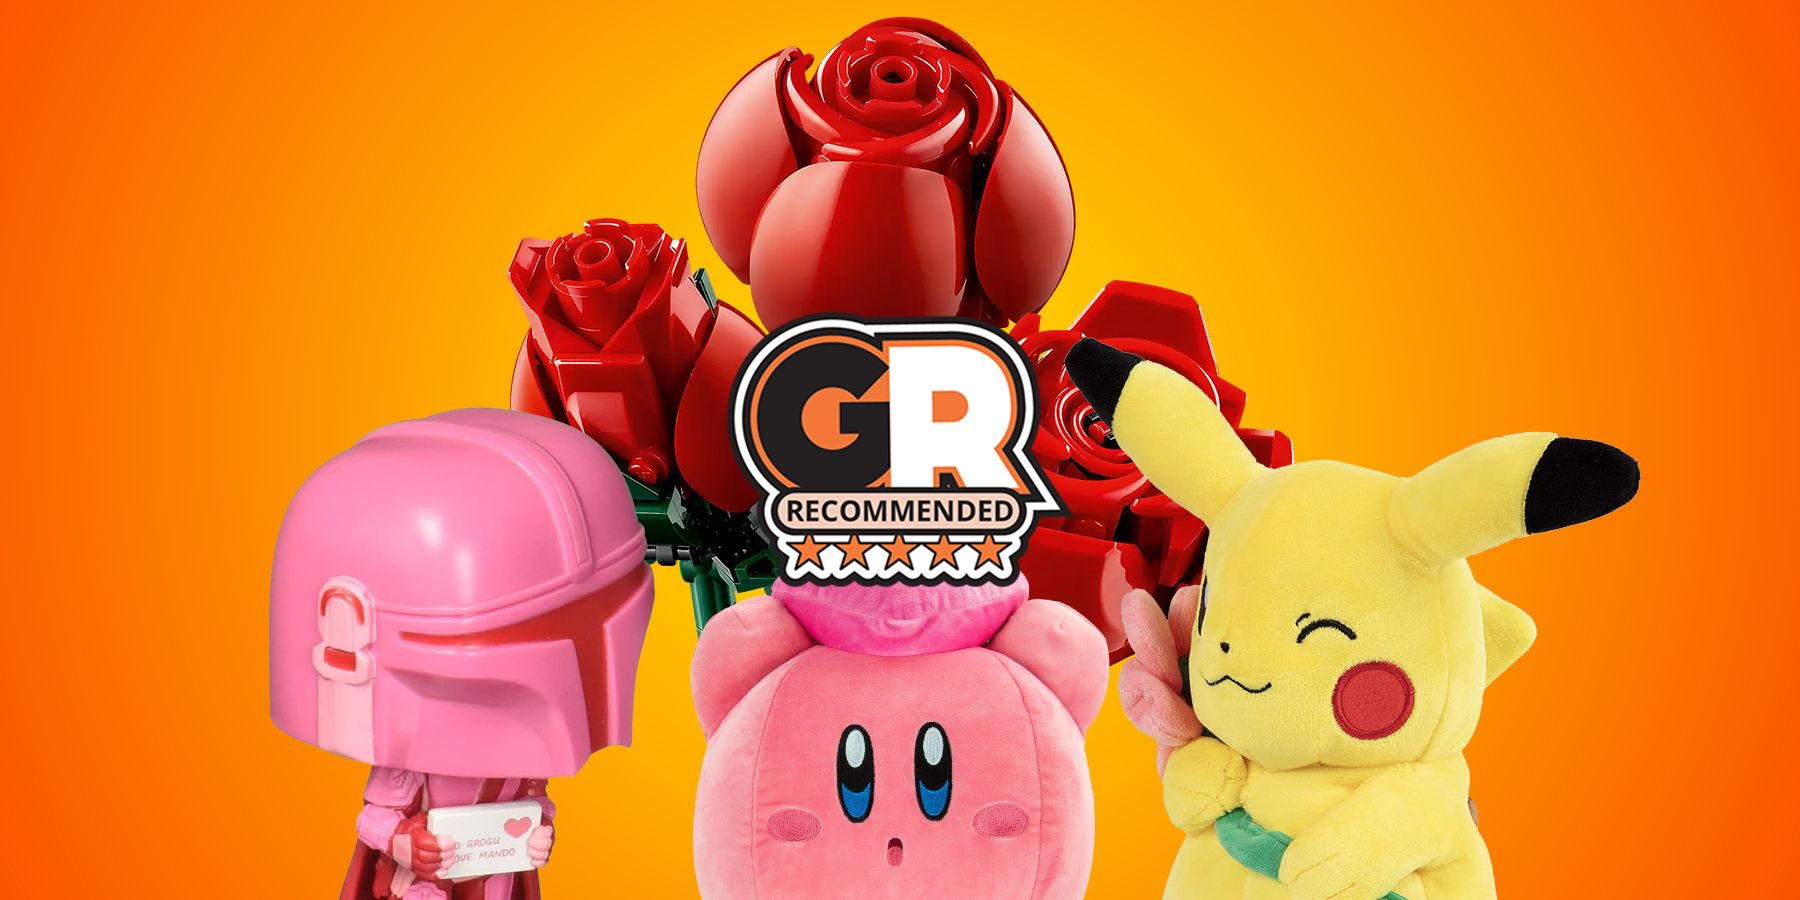 The best Valentine's Day gifts for gamers